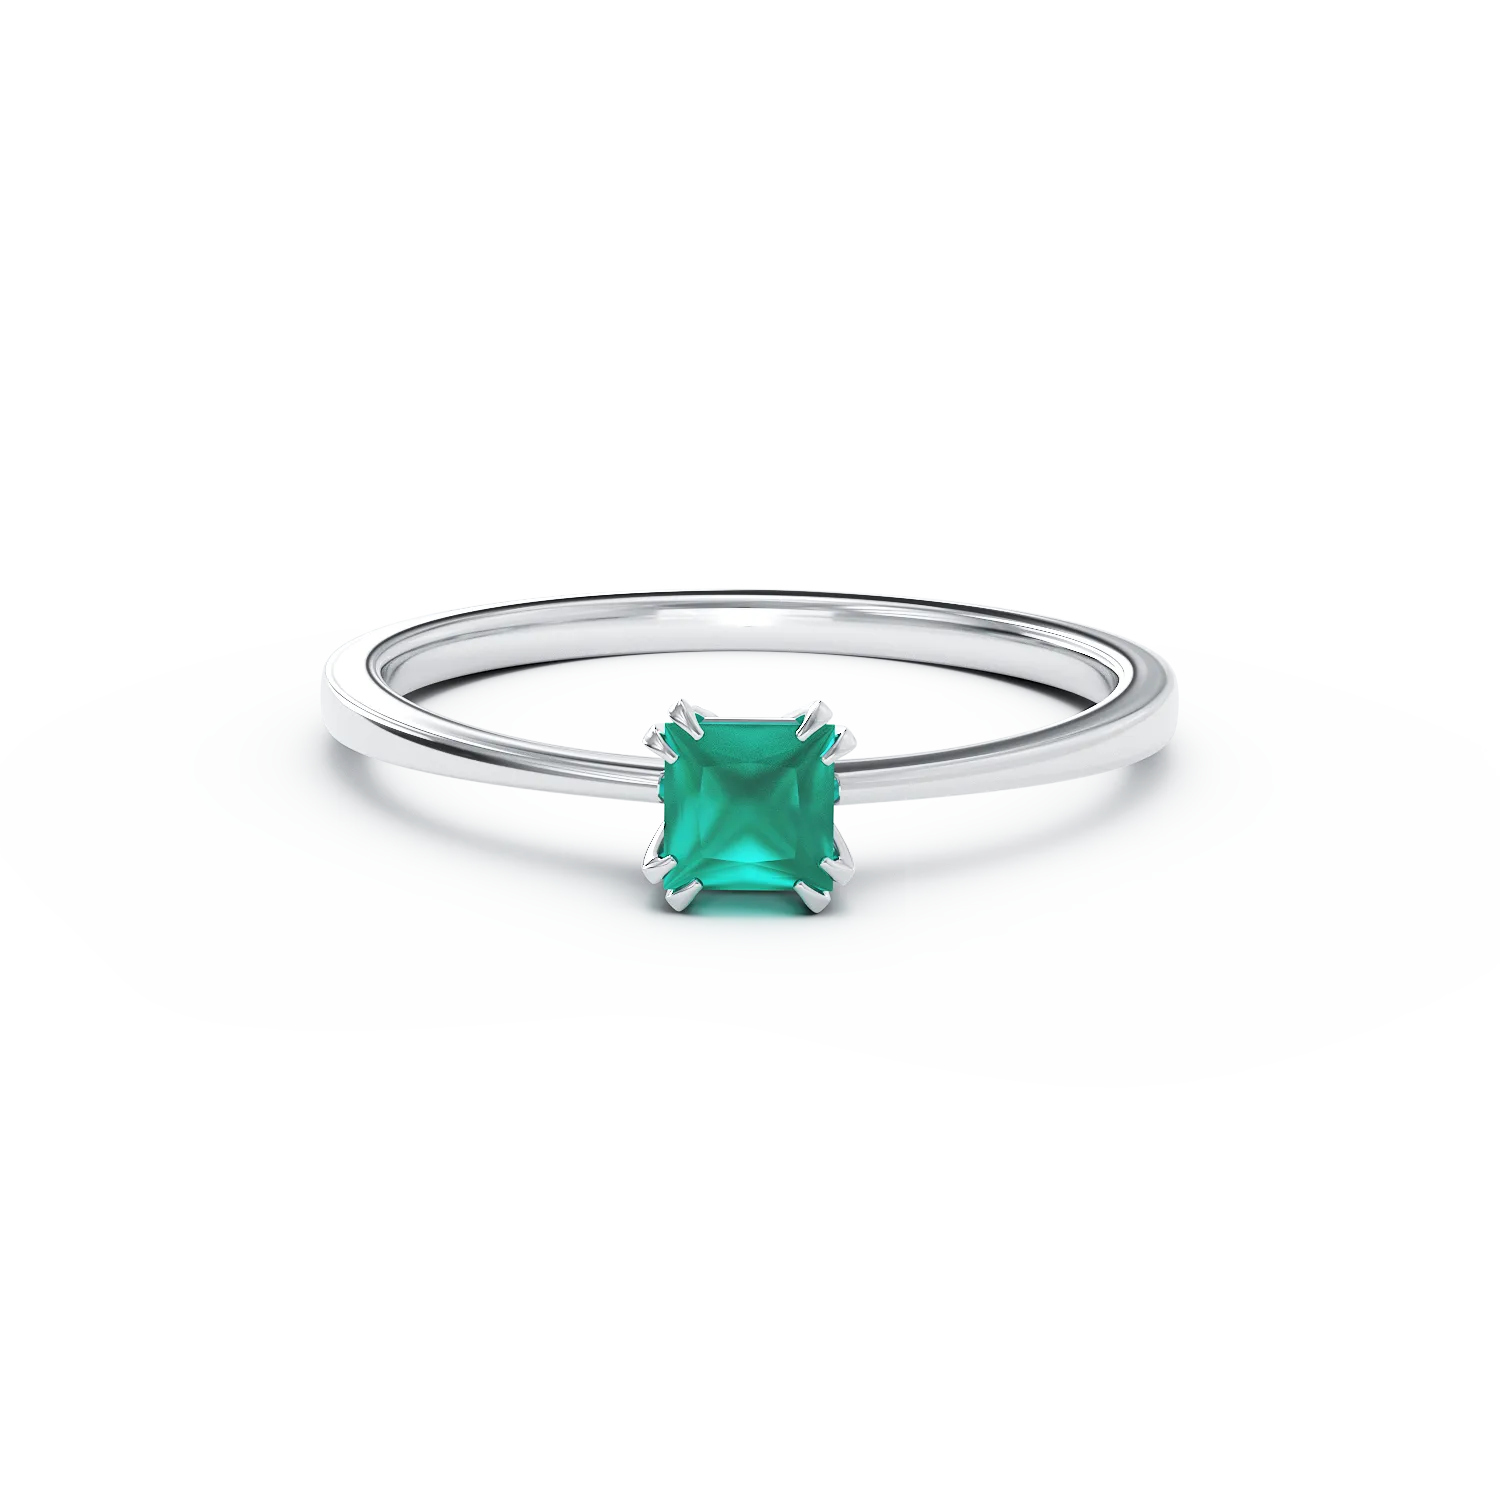 18K white gold engagement ring with 0.41ct emerald